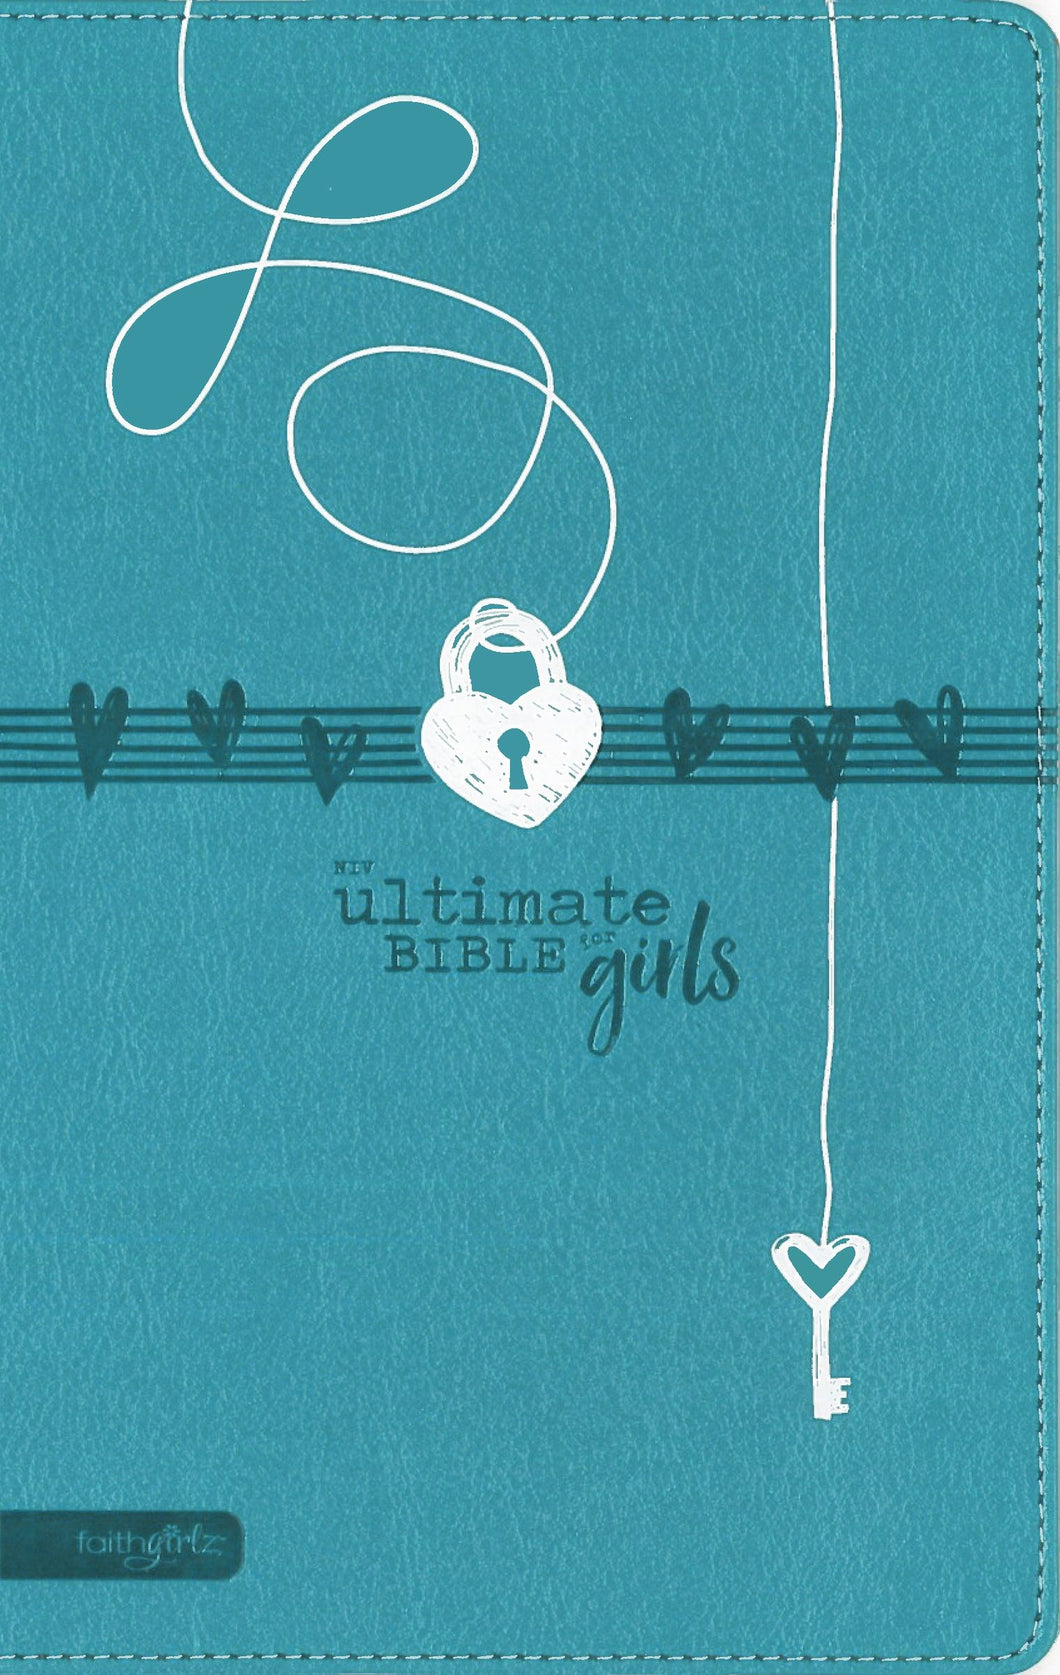 NIV Ultimate Bible For Girls (Faithgirlz Edition)-Teal Leathersoft Indexed